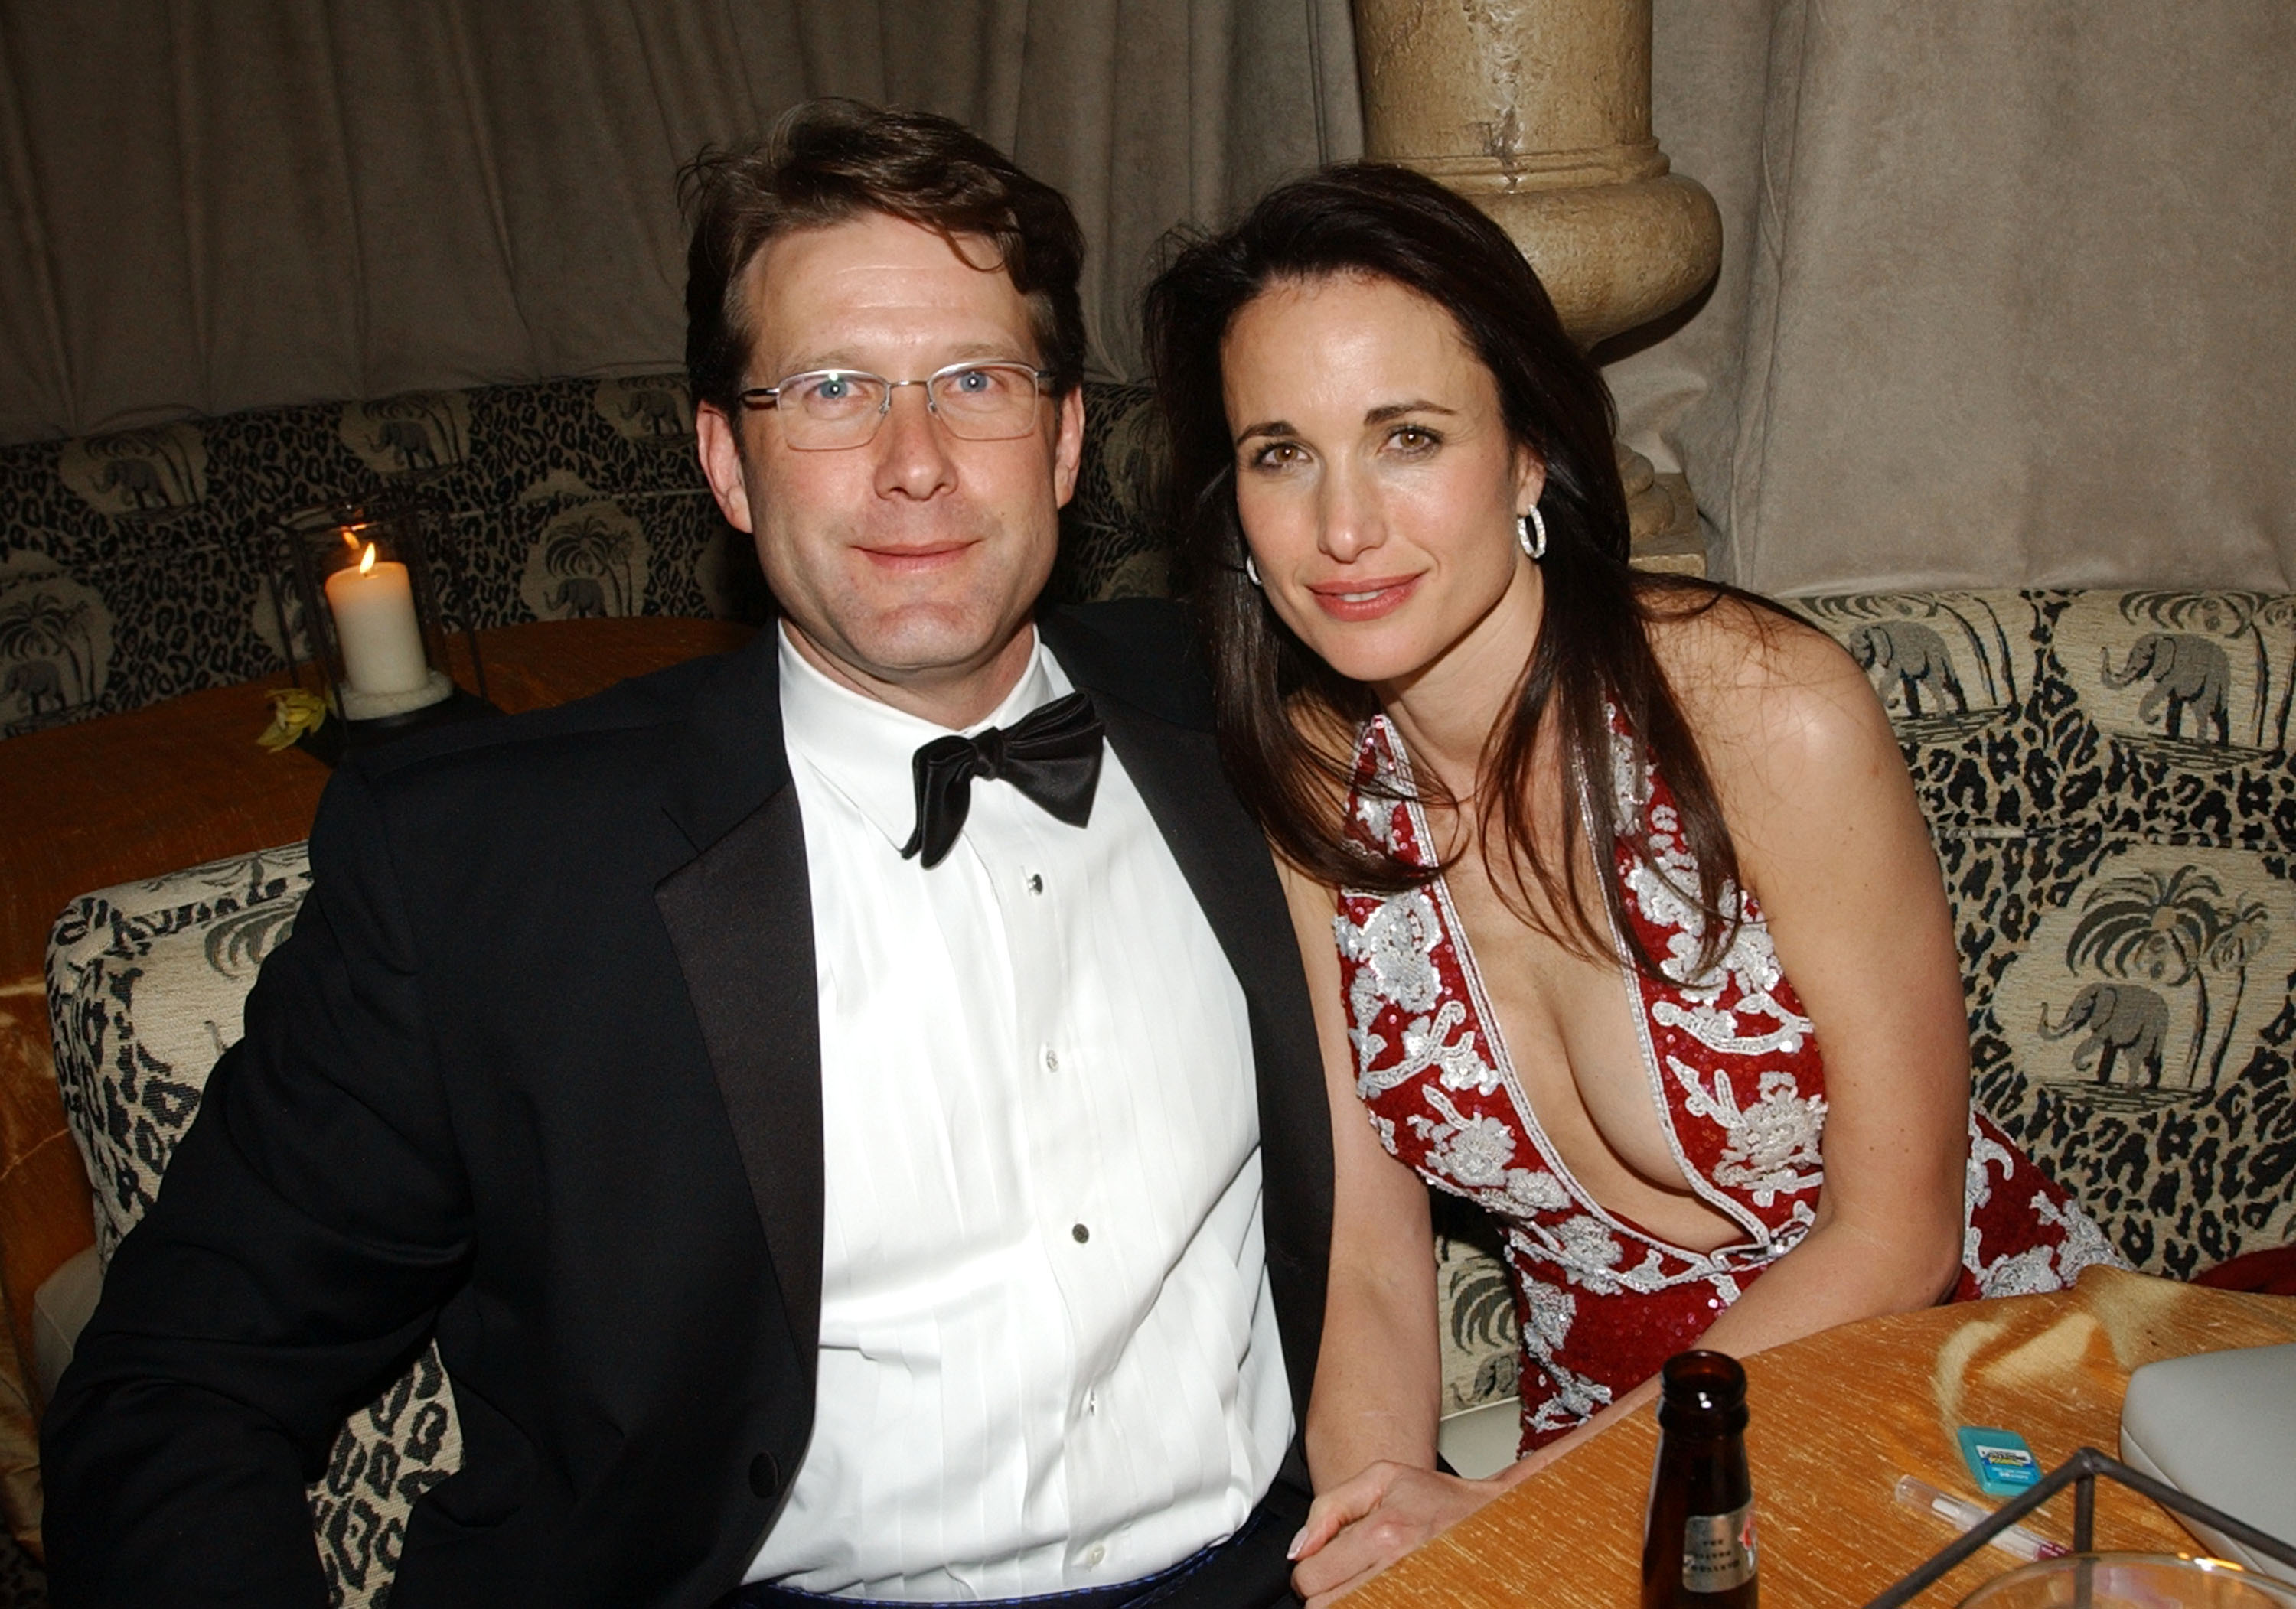 Rhett Hartzog and Andie MacDowell at the HBO after-party at the Golden Globe Awards on January 20, 2002. | Source: Getty Images